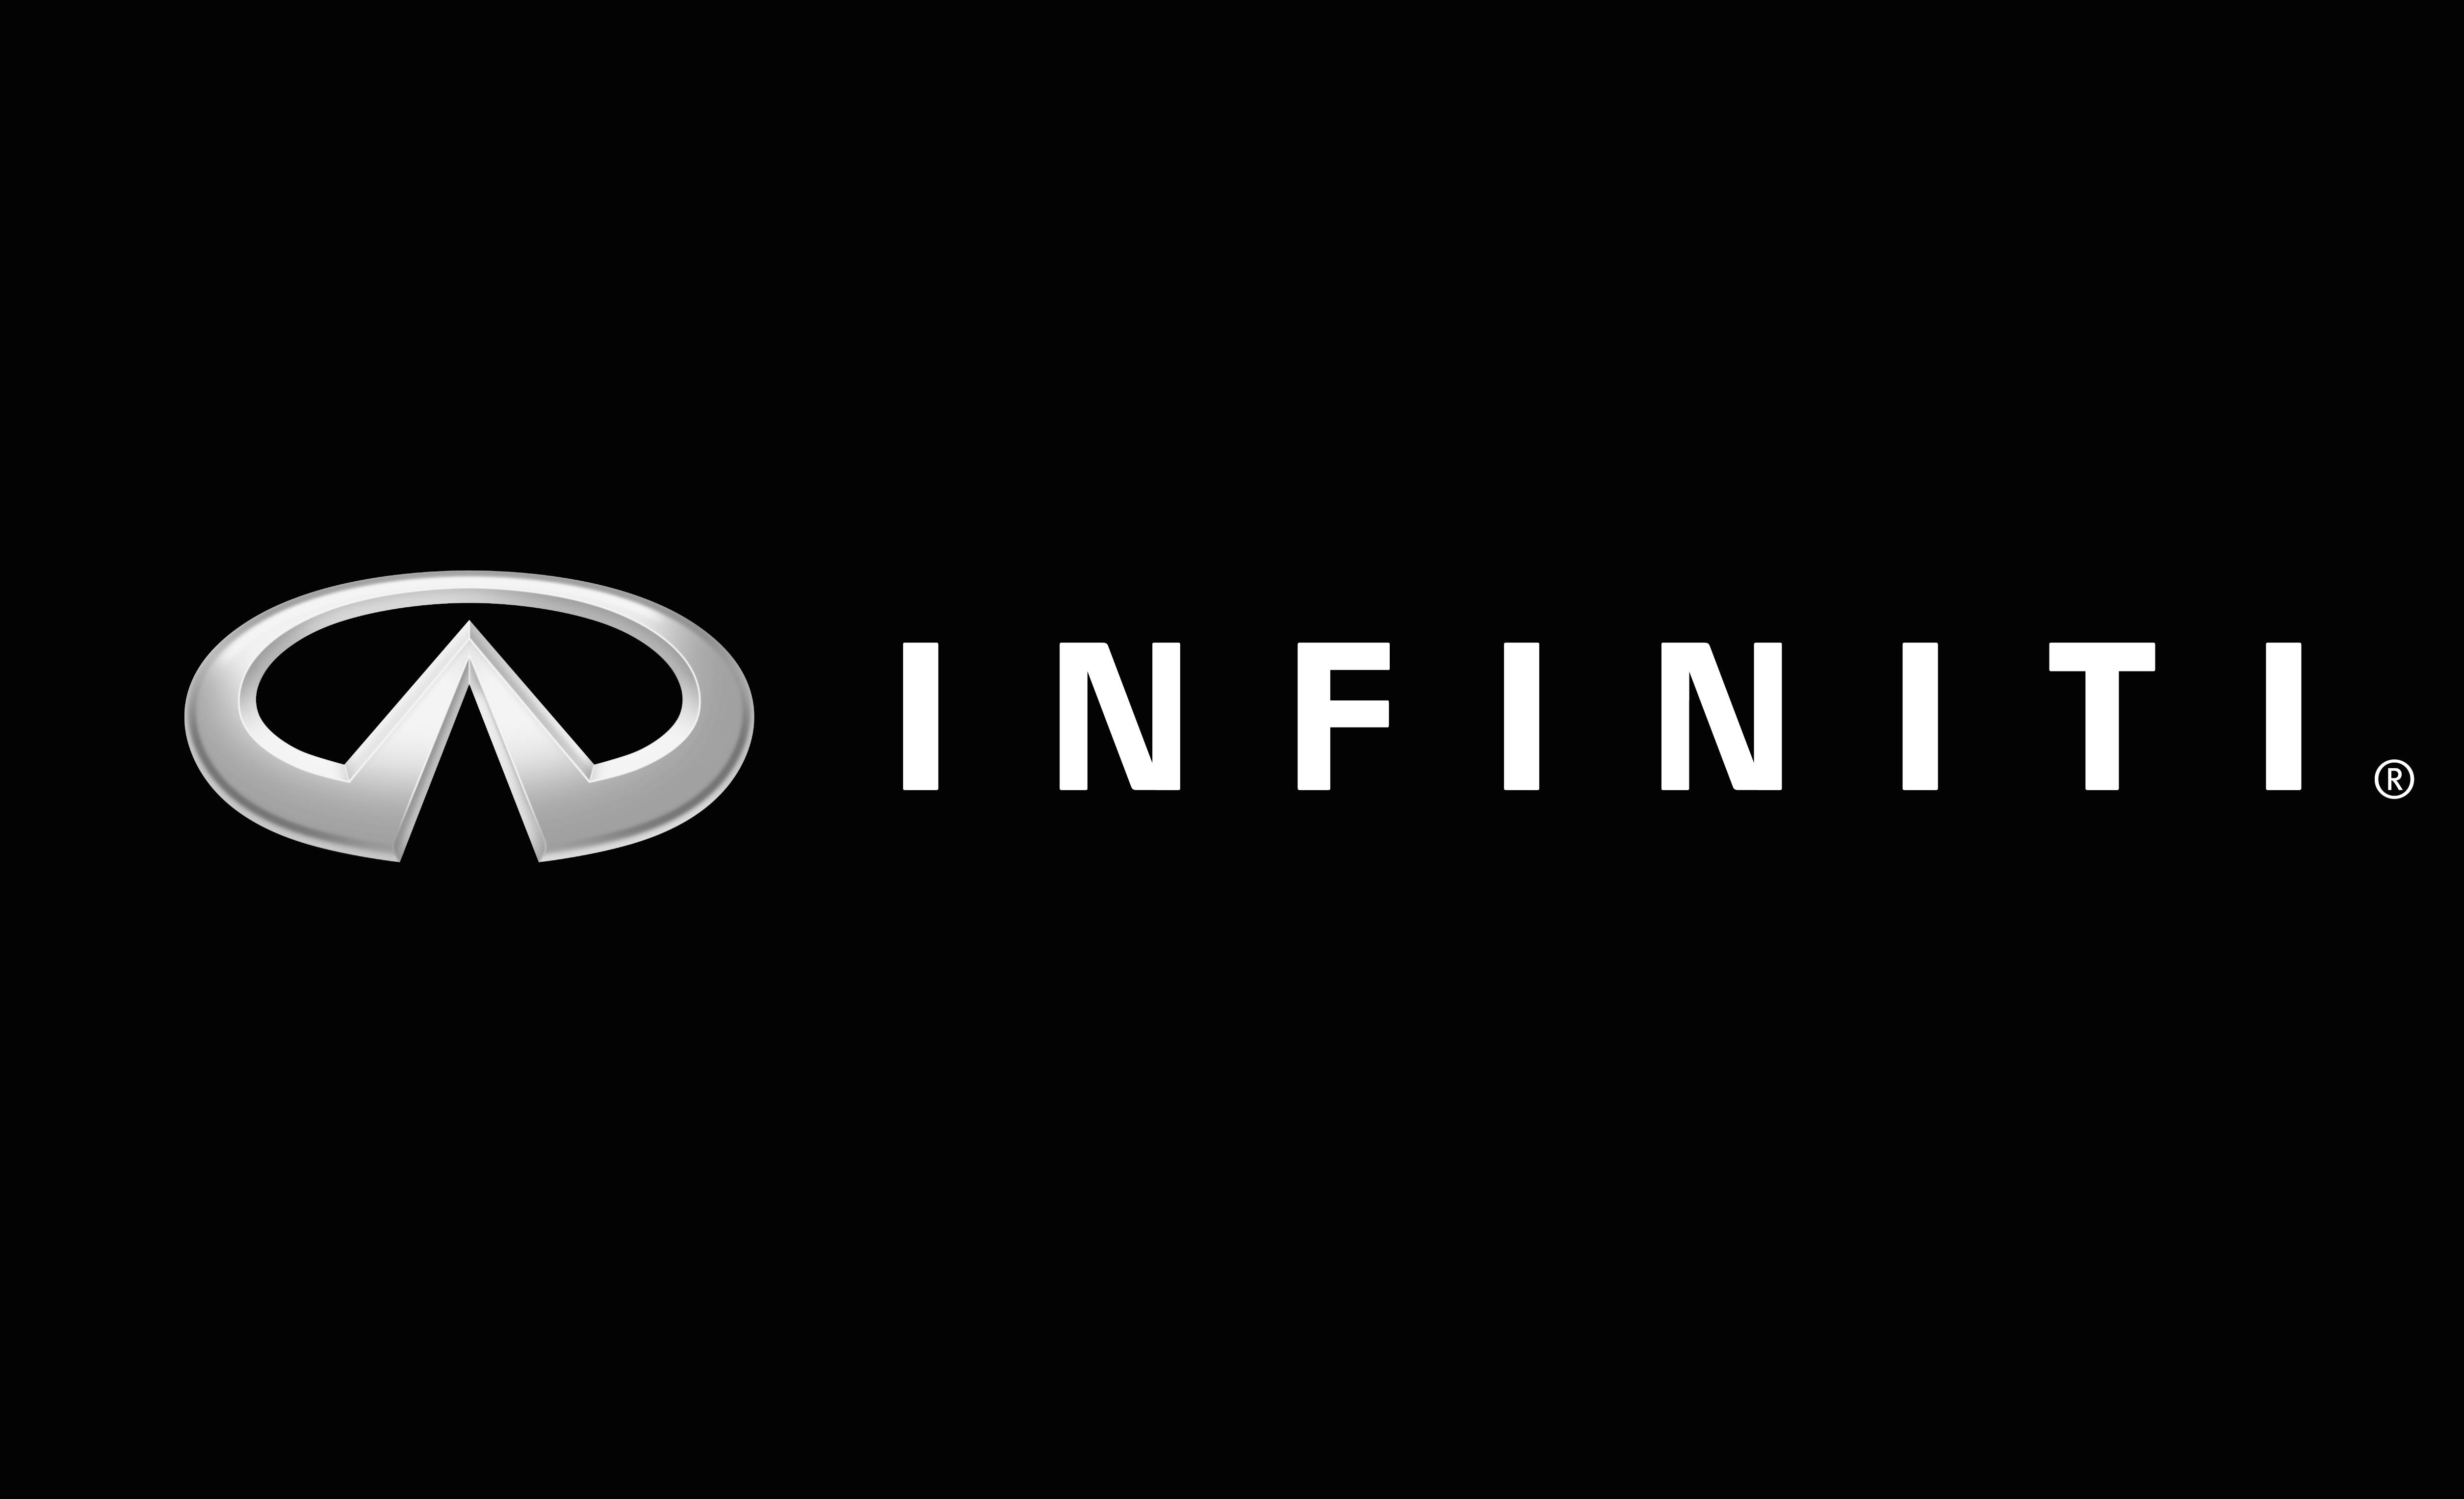 What Is New Today65365: Infiniti Car Logo Wallpaper Image